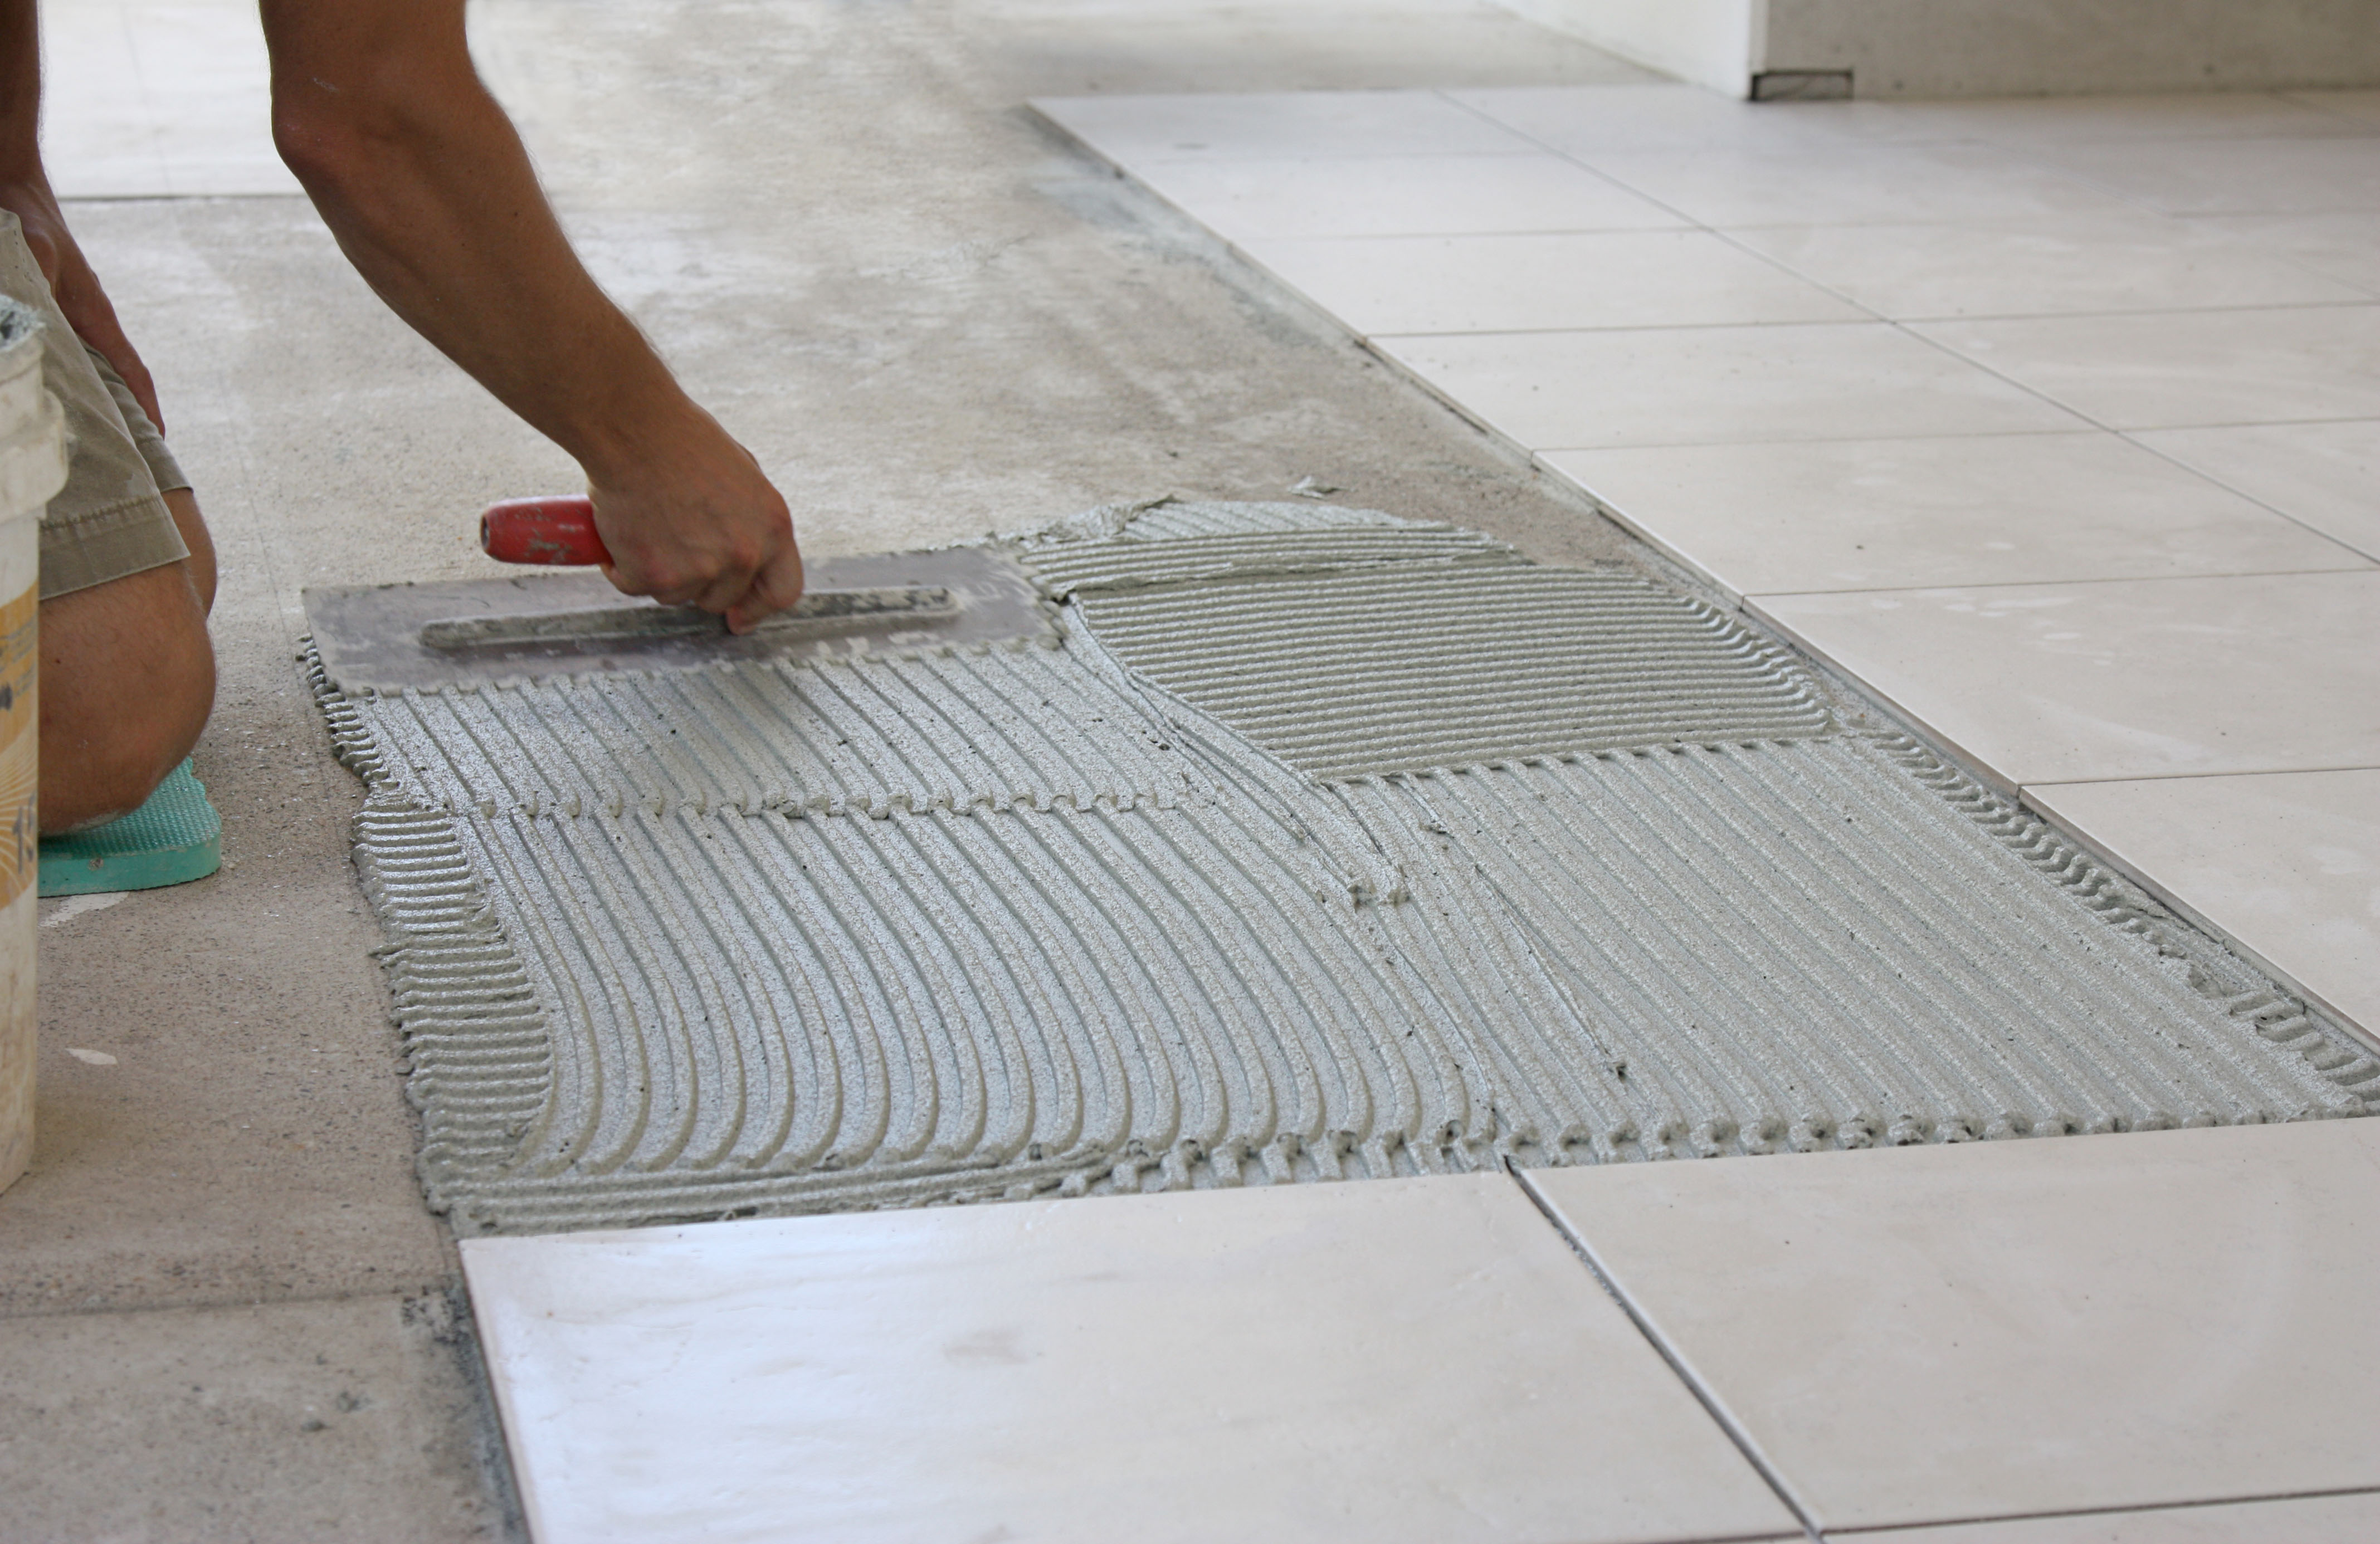 Adhesive mat for tiling projects - Residential Design